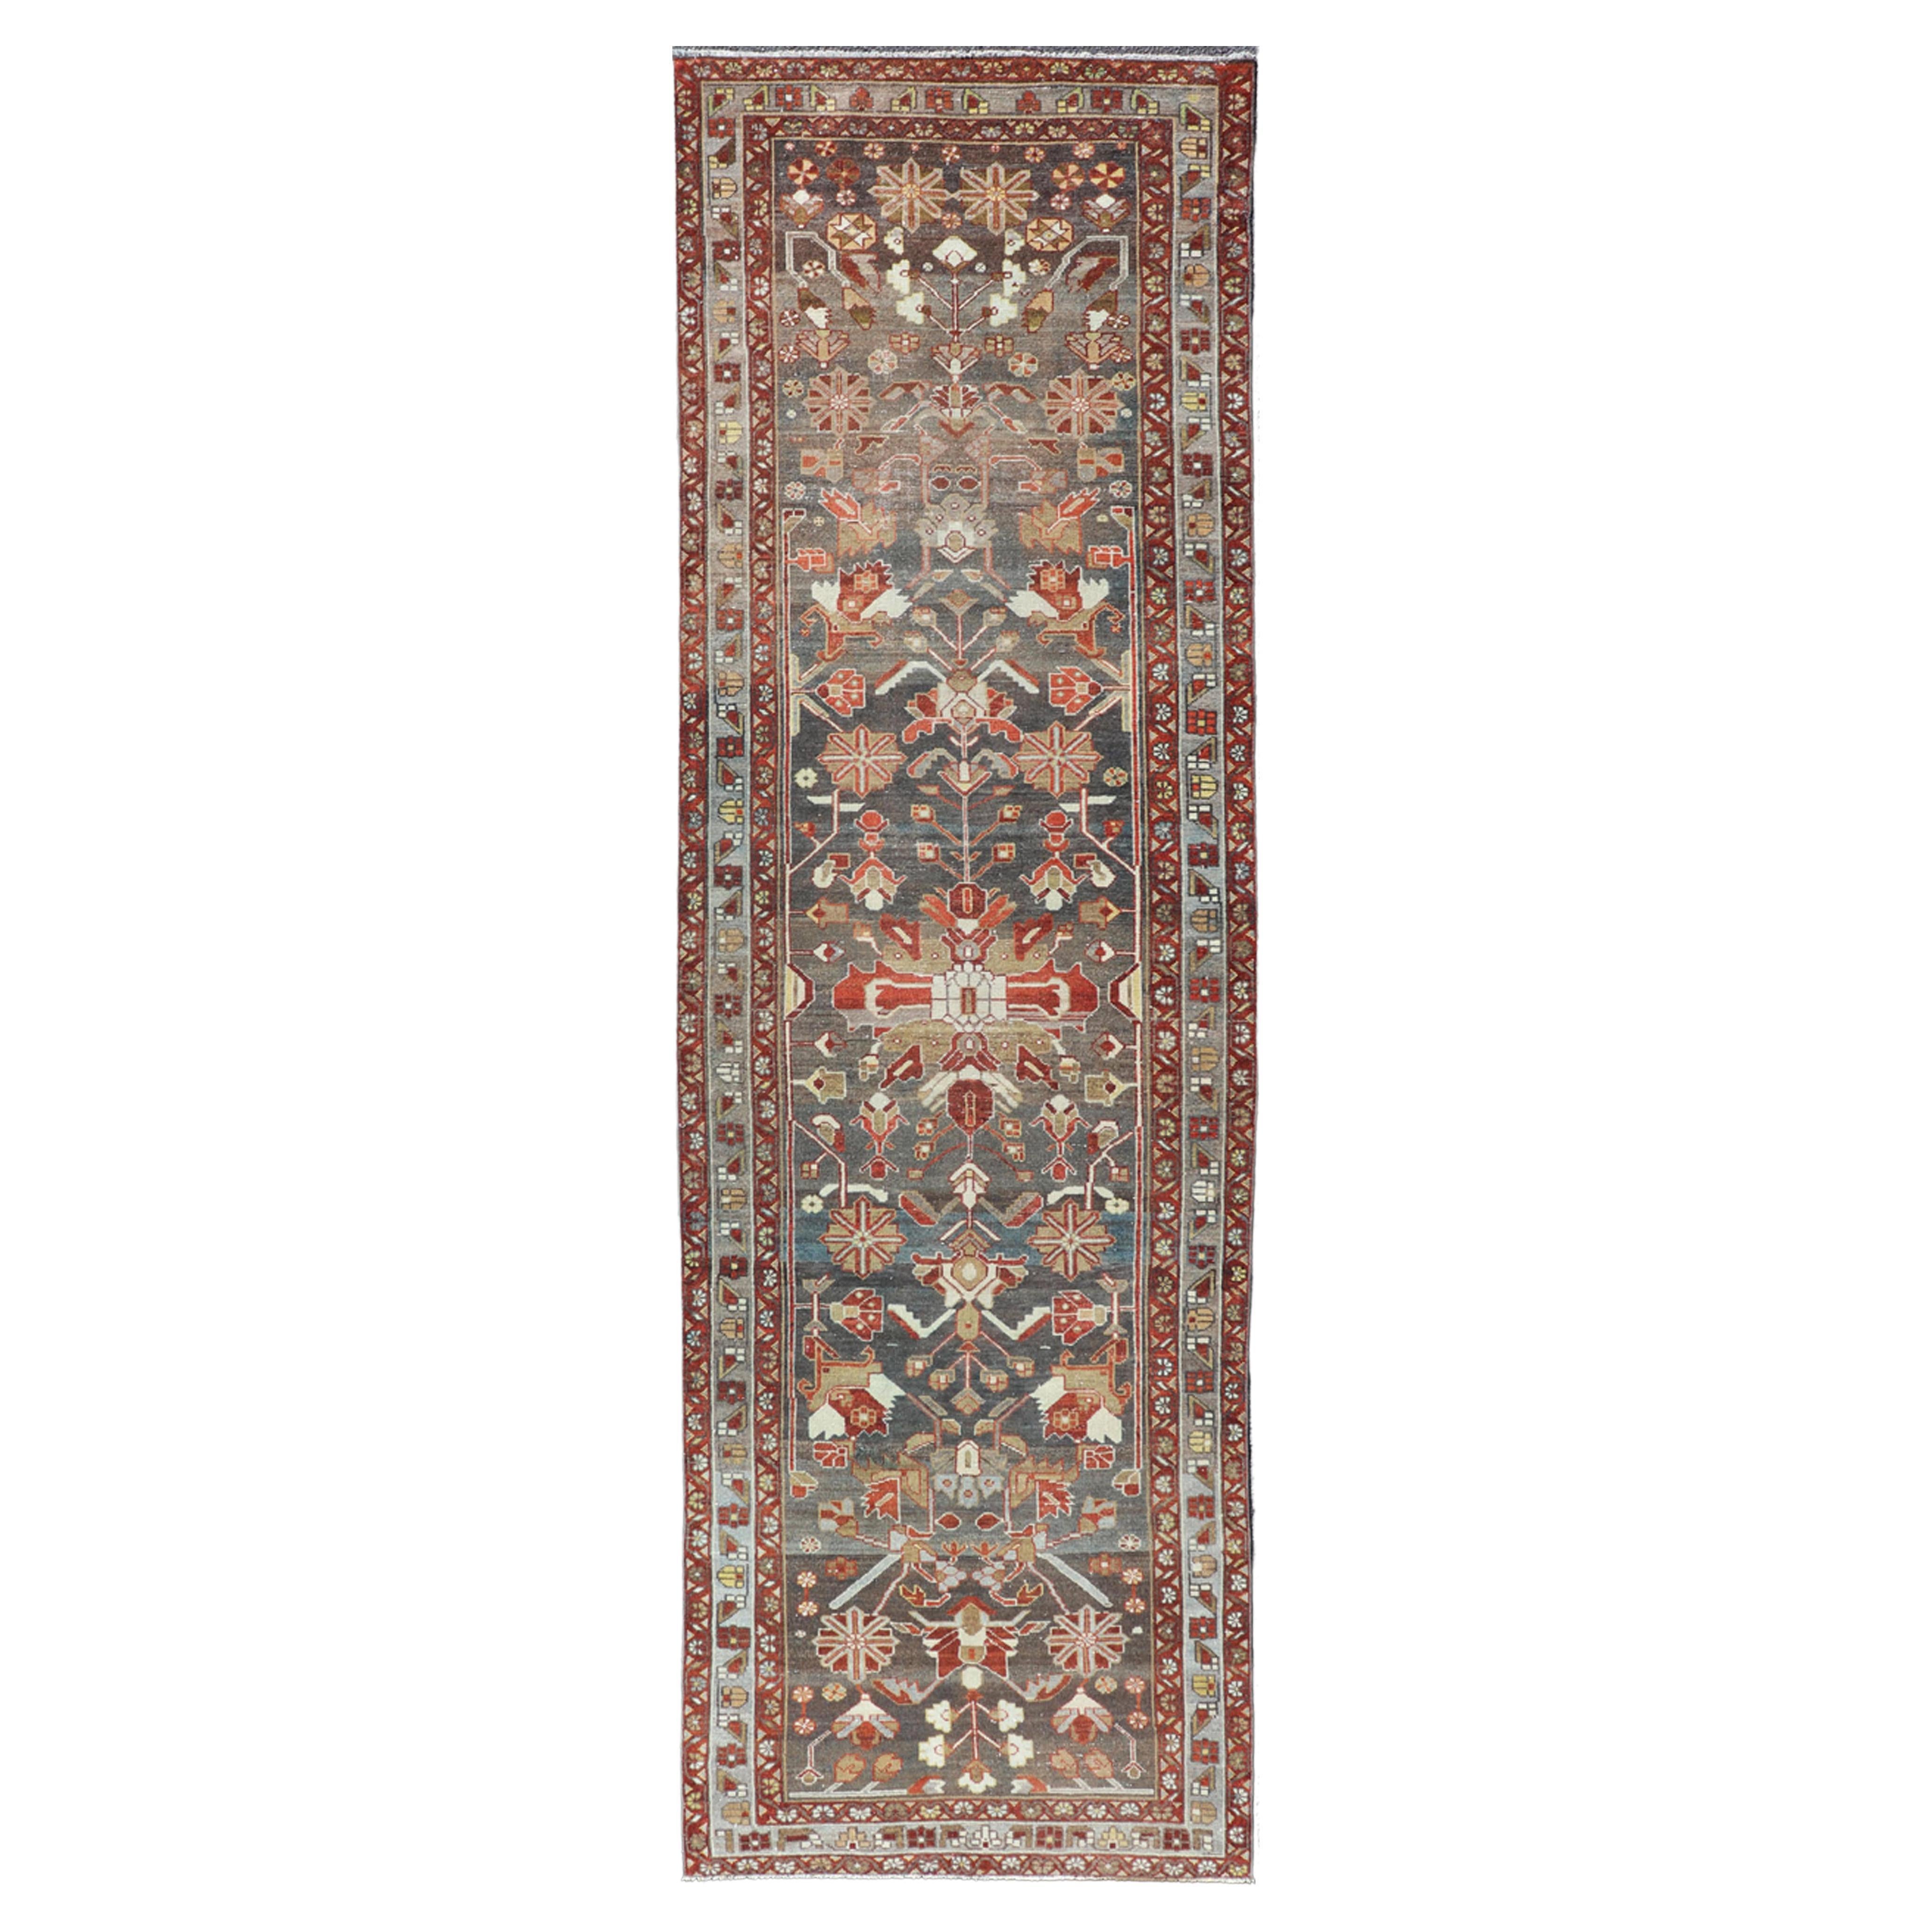 Antique Malayer Runner with Geometric Designs in Gray, Blue, Red, and Tan